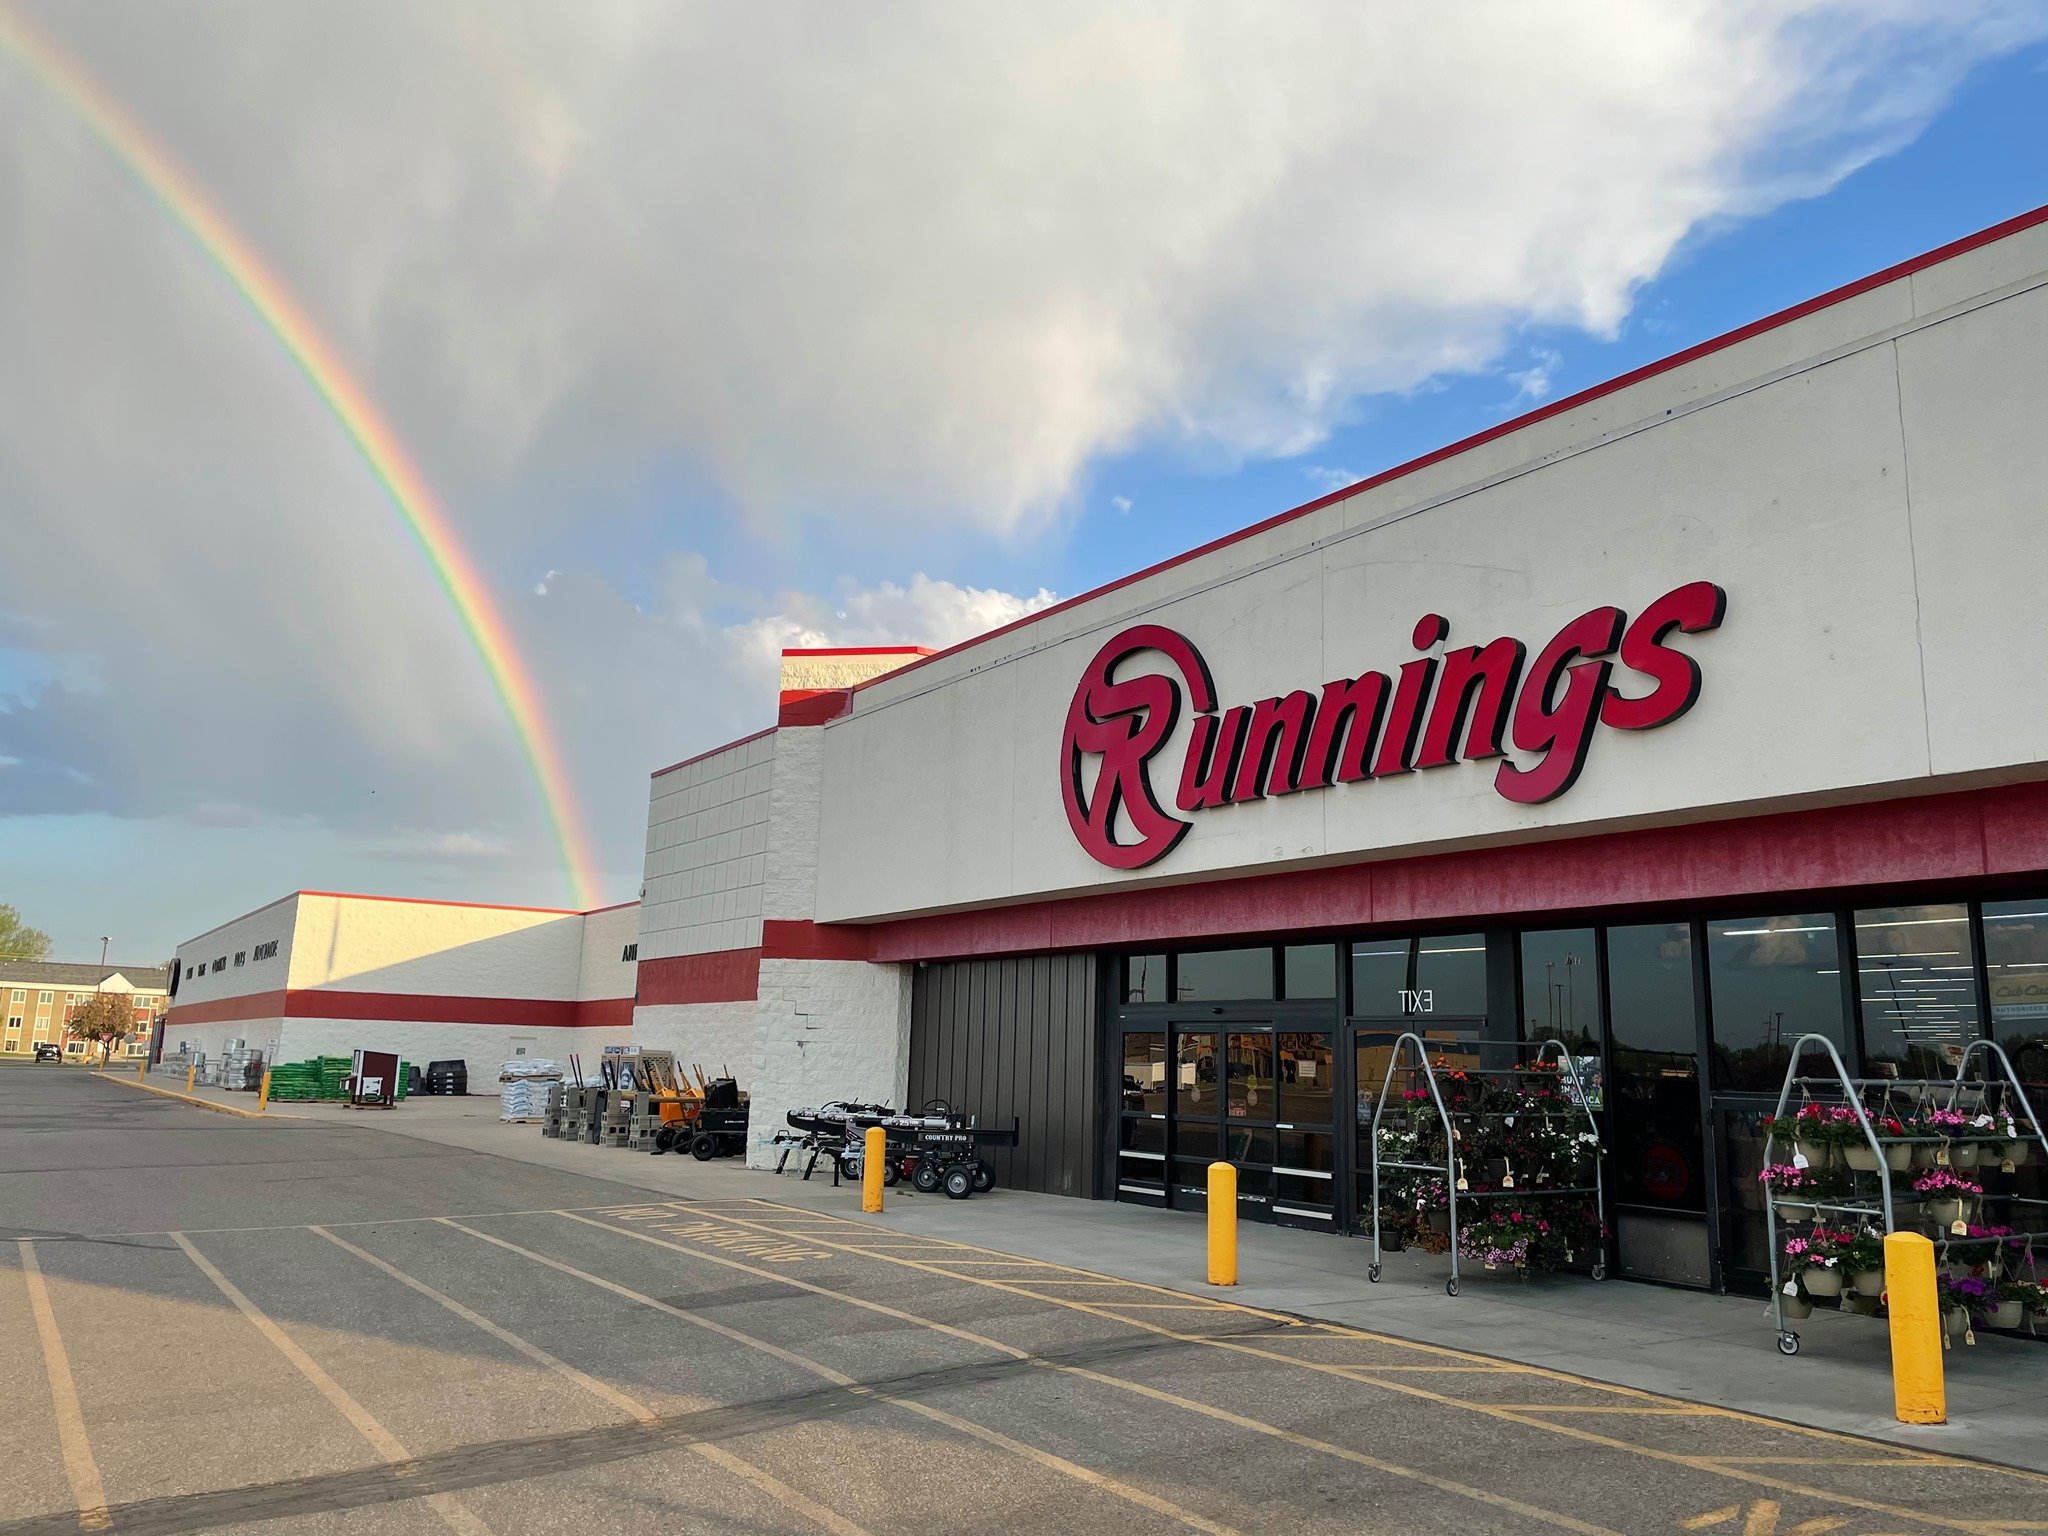 Image of Runnings storefront